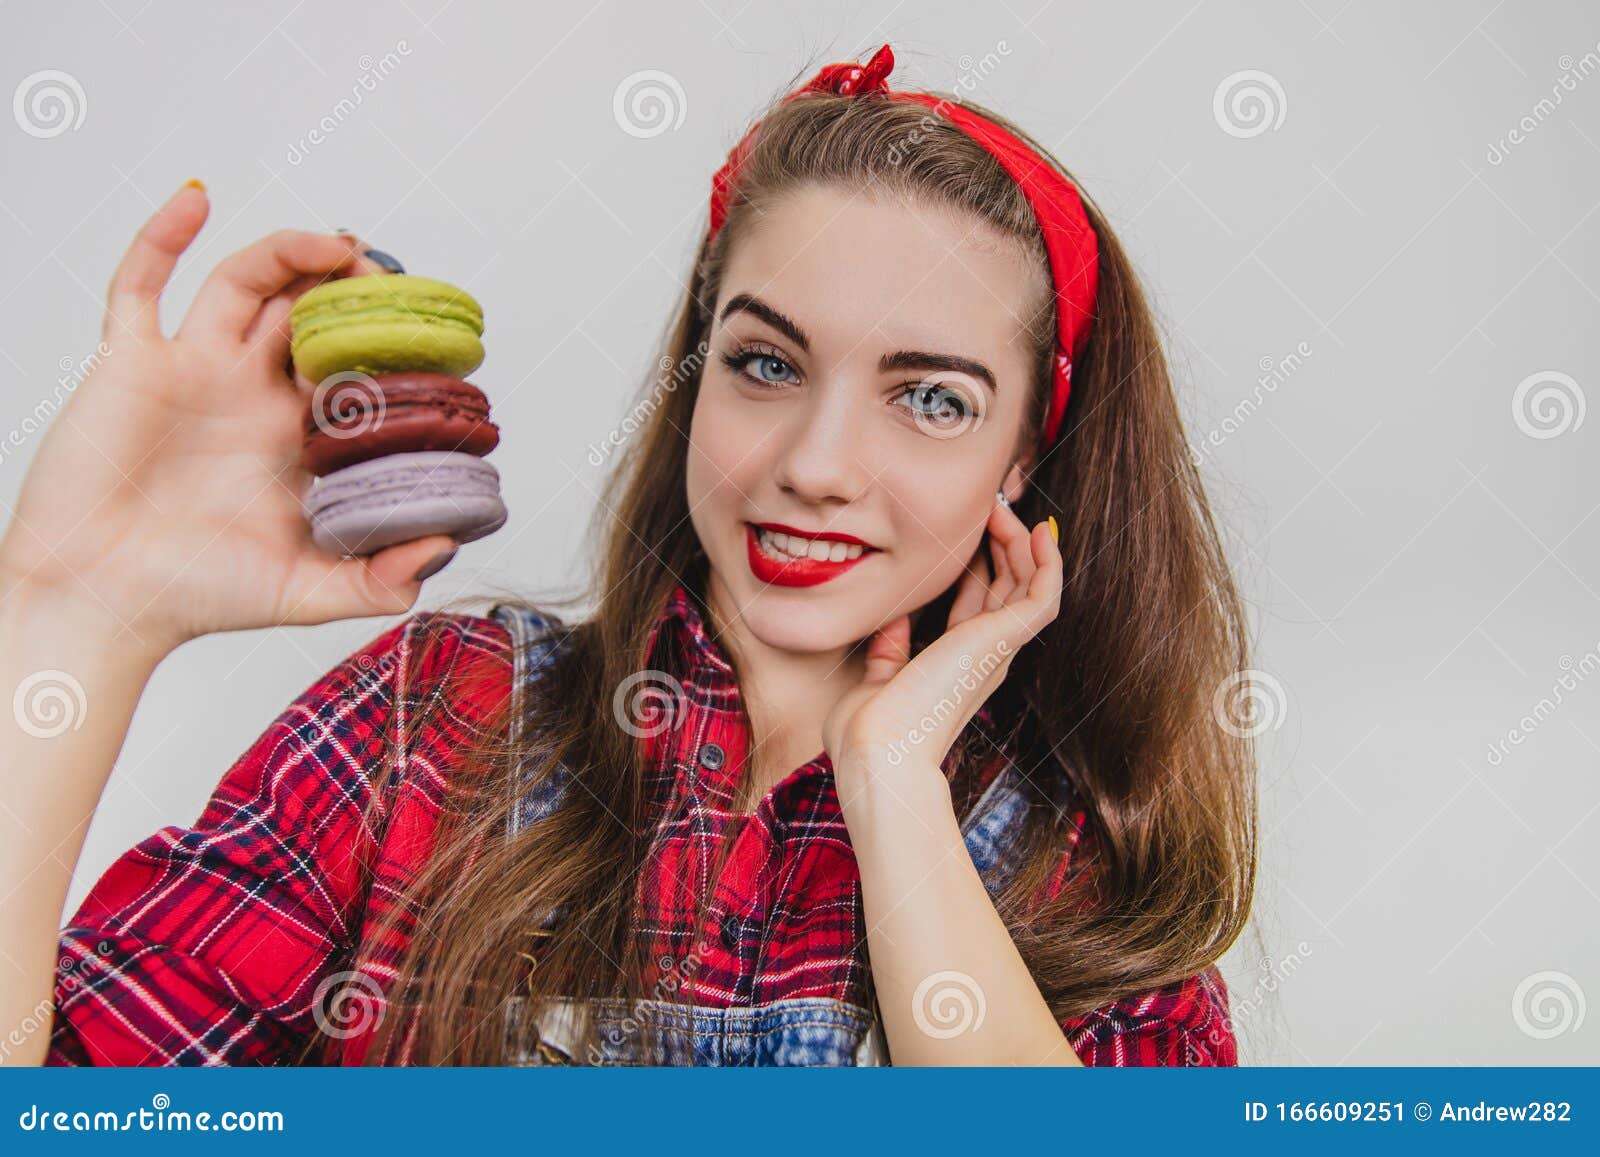 Beautiful Happy Cute Young Pretty Woman Holding A Pyramid Of Macaroons Looking At The Camera